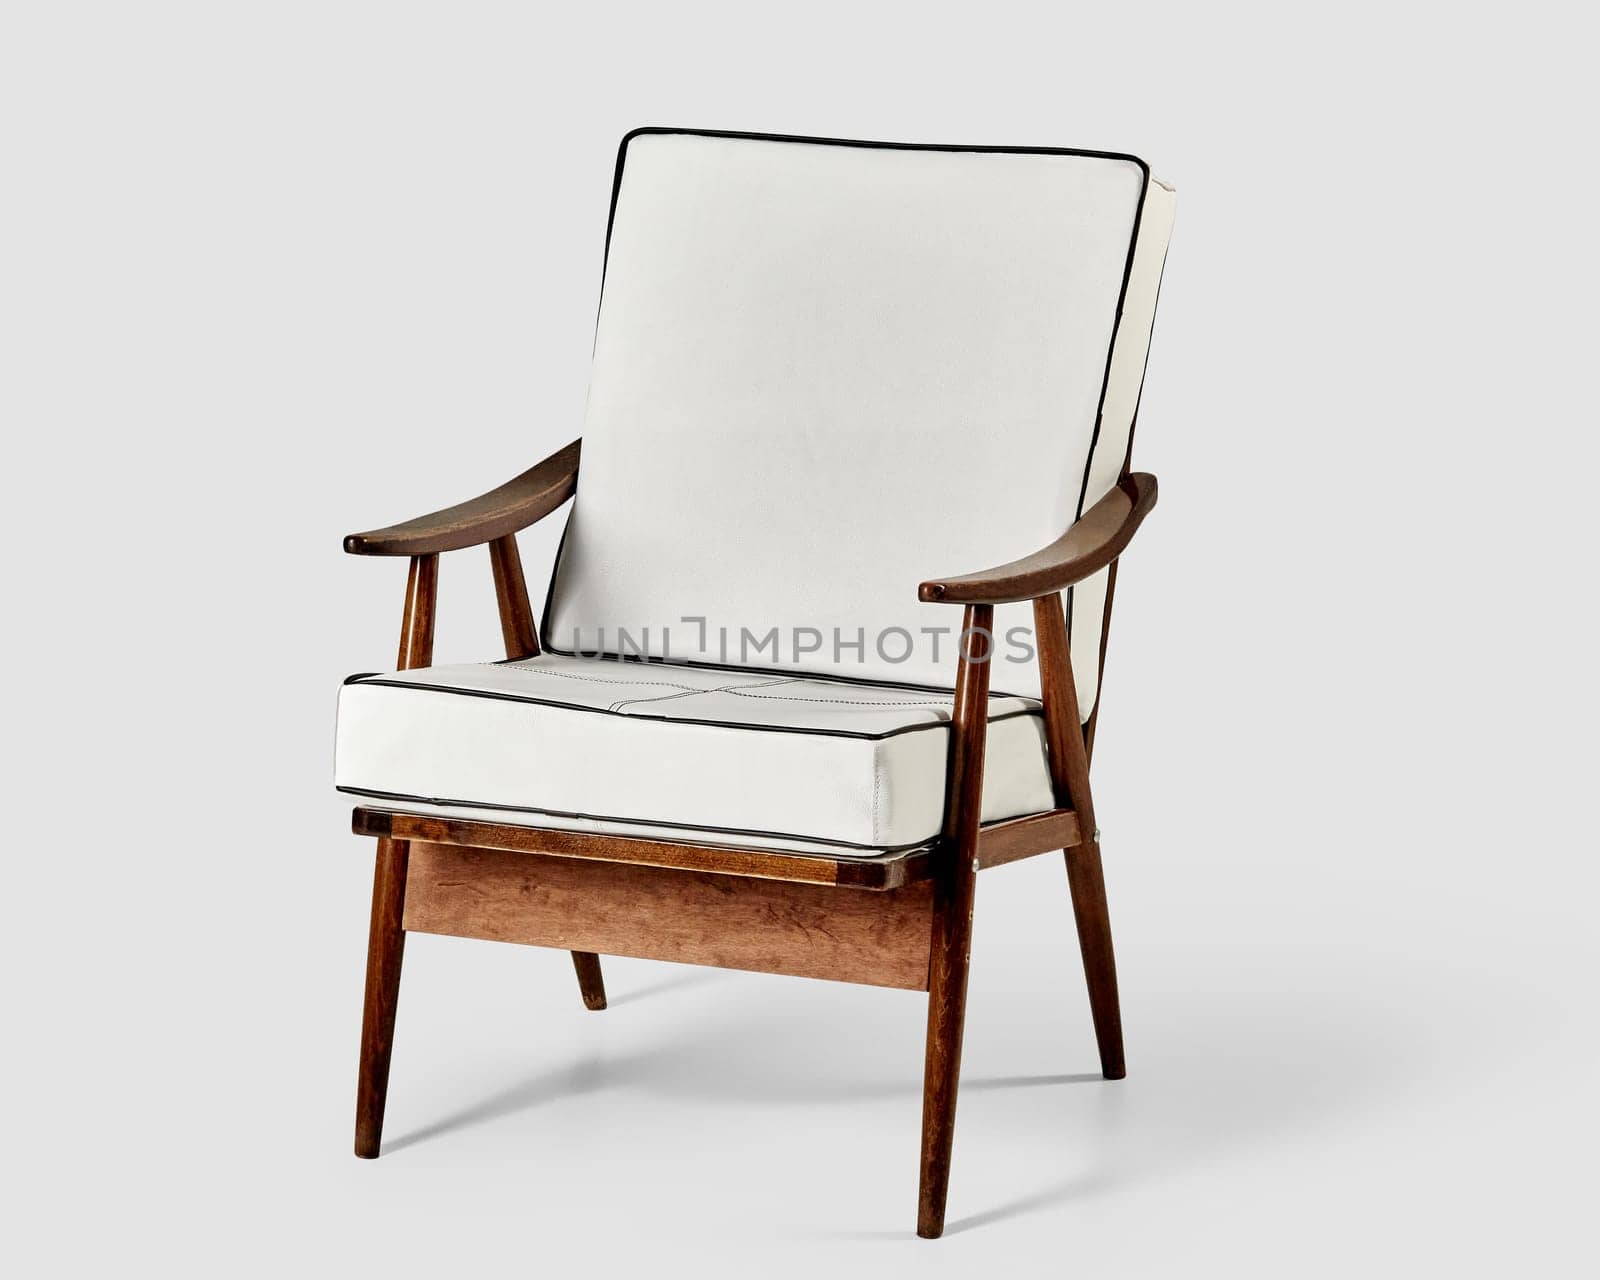 Vintage-inspired wooden chair with sleek white leather upholstery and distinctive armrests, against light backdrop. Stylish piece of furniture for cozy interio